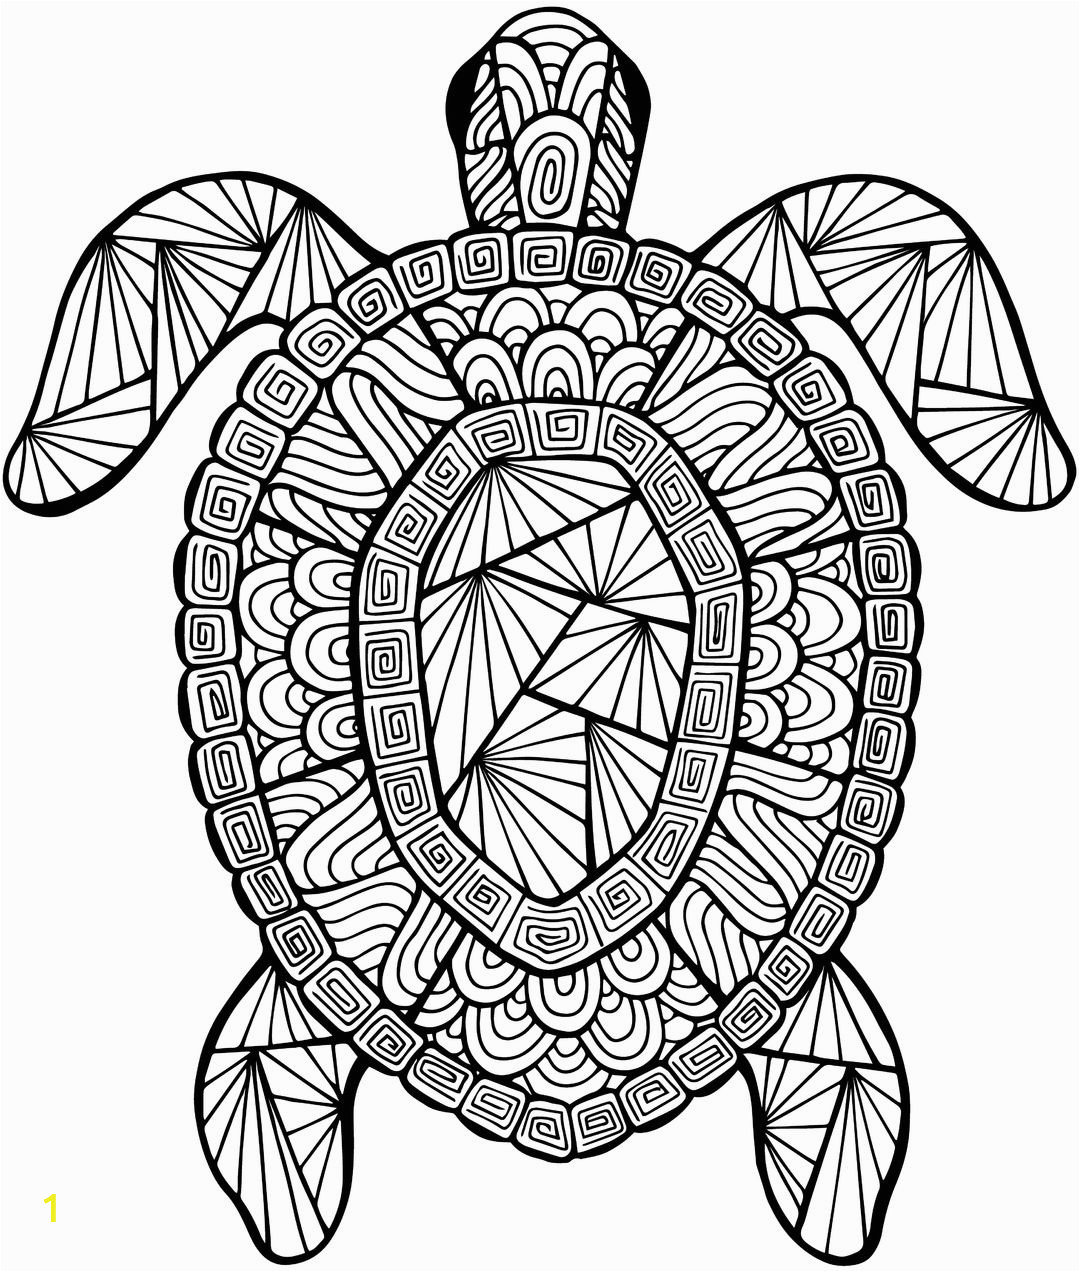 Sea Turtle Coloring Pages for Adults Detailed Sea Turtle Advanced Coloring Page